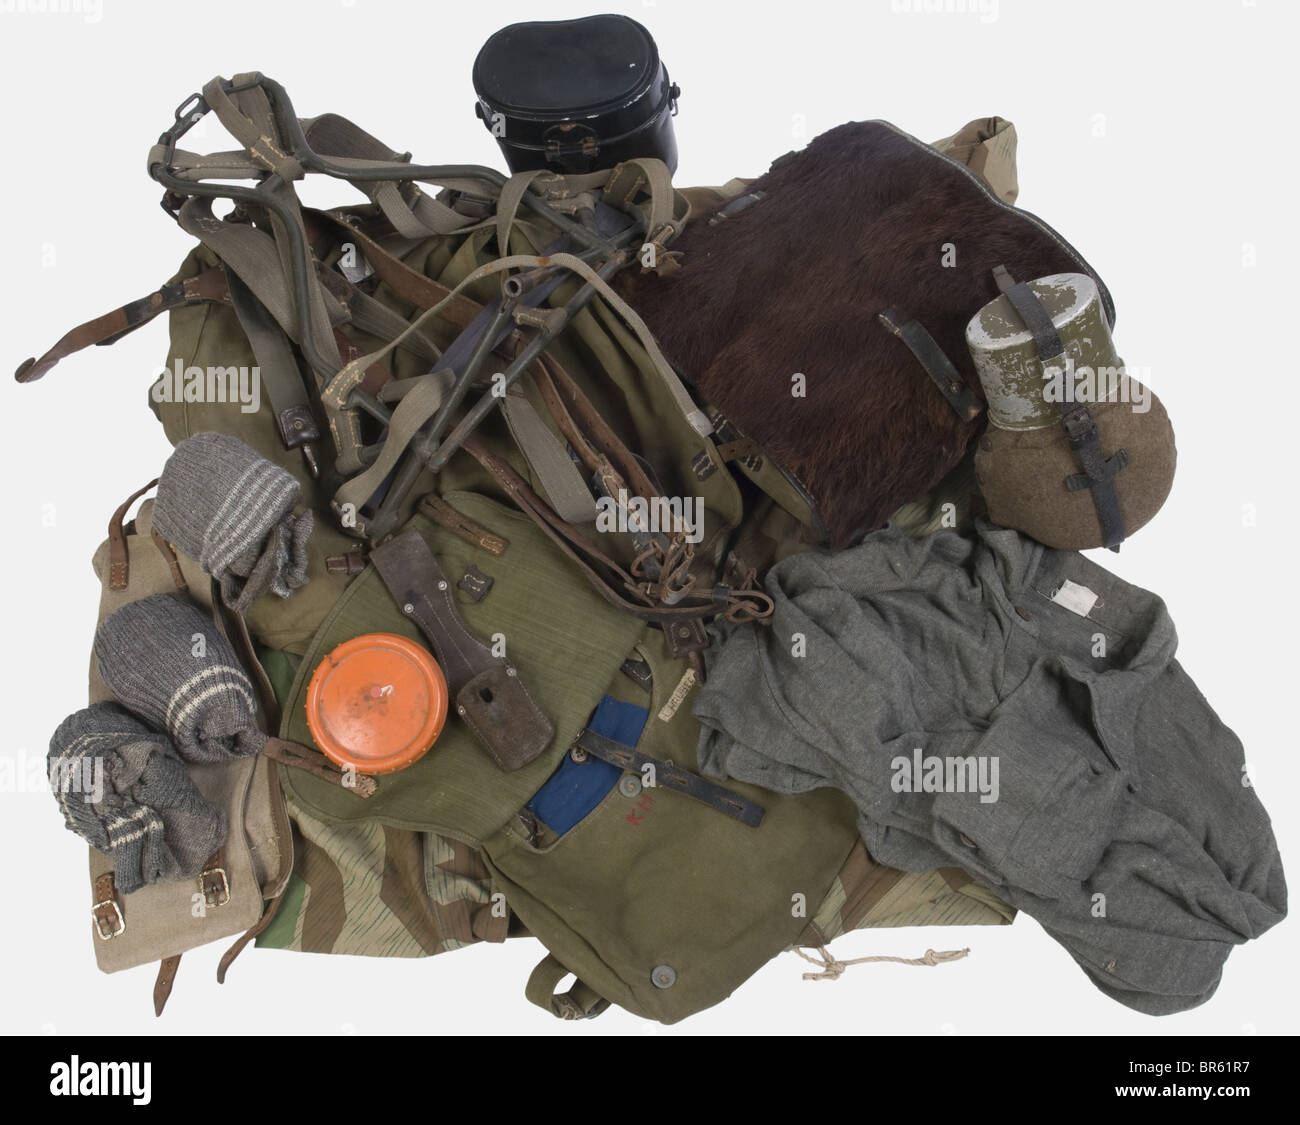 A group of Wehrmacht equipment, including a Tornister haversack with hooks,  two clothing bags of green cloth, a canteen with cup, a breadbag with  carrying strap, tan canvas gaiters, black leather Y-straps (